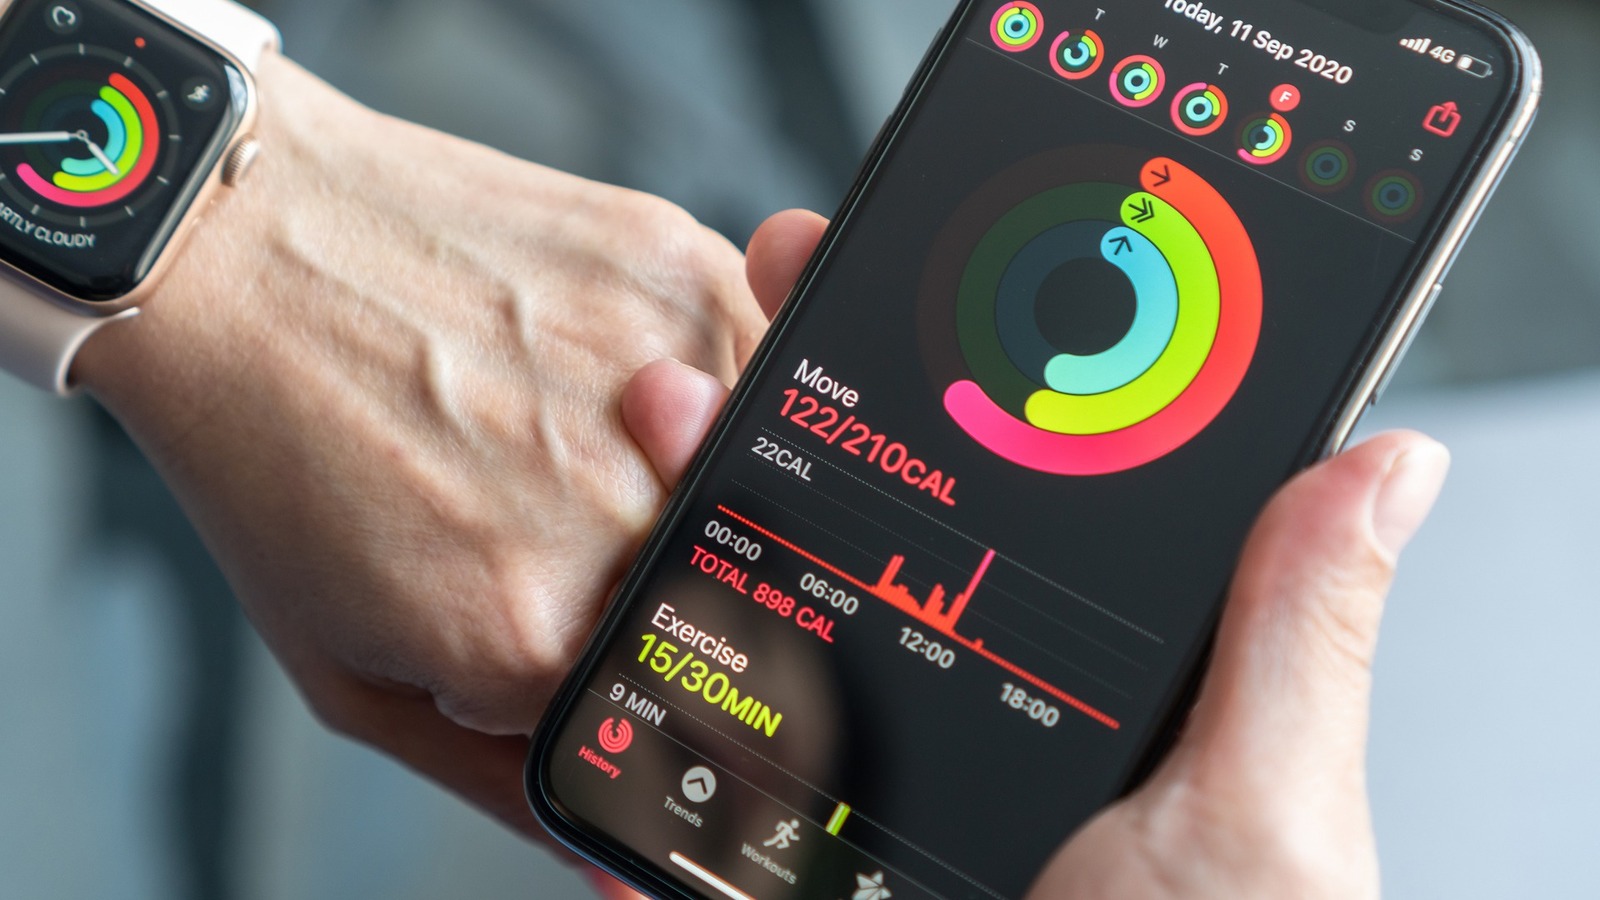 How Does The Apple Watch Calculate Calories Burned, And Is It Accurate?